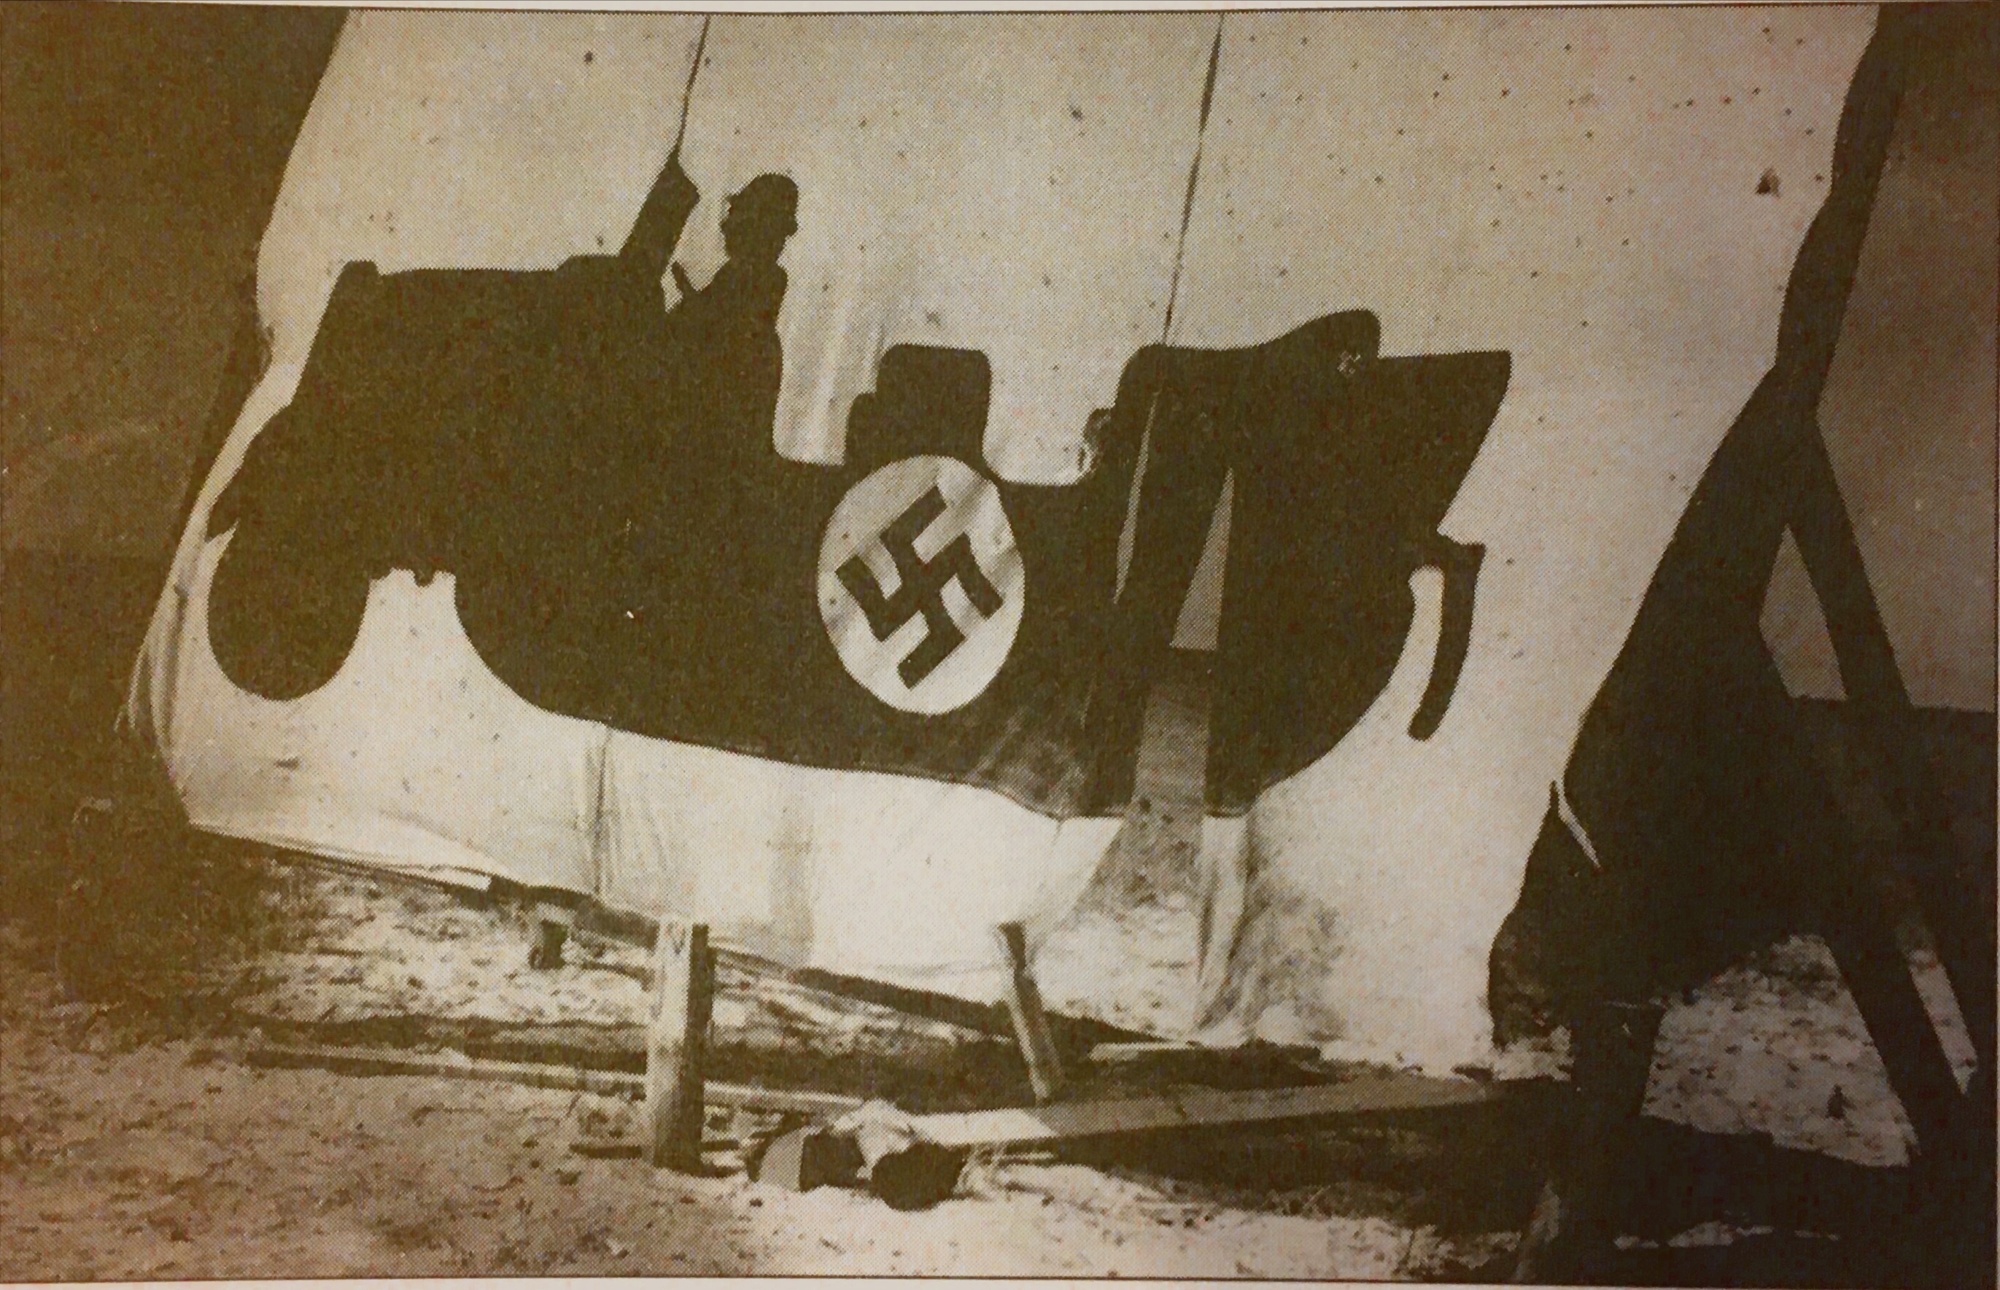 An image of a target used on Longboat Key by the Army Air Force's P-40 strafe practice, from Ralph Hunter's “From Calusas to Condominiums, A Pictorial History of Longboat Key.”